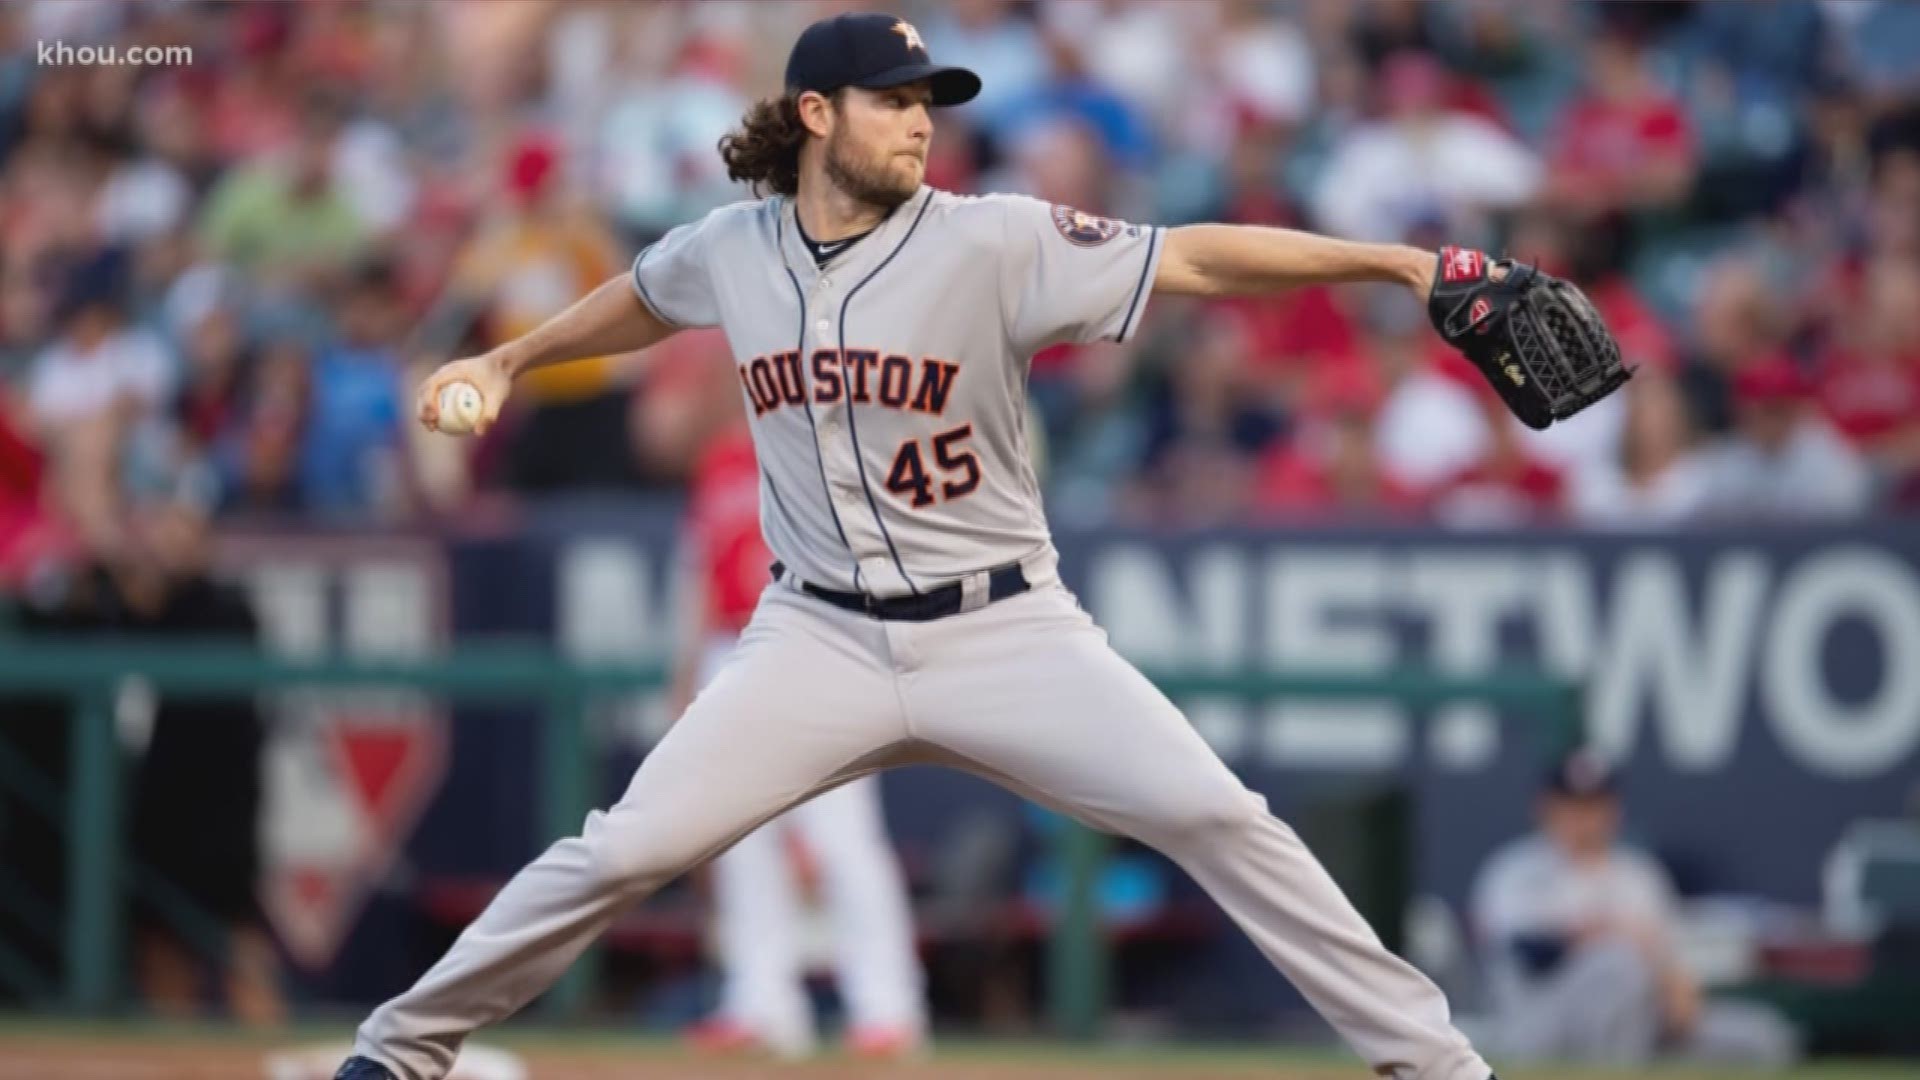 Astros fans should pay attention to Cole's durability, flexibility and command as he returns from a hamstring injury; Plus, we pick the Astros' unsung heroes.